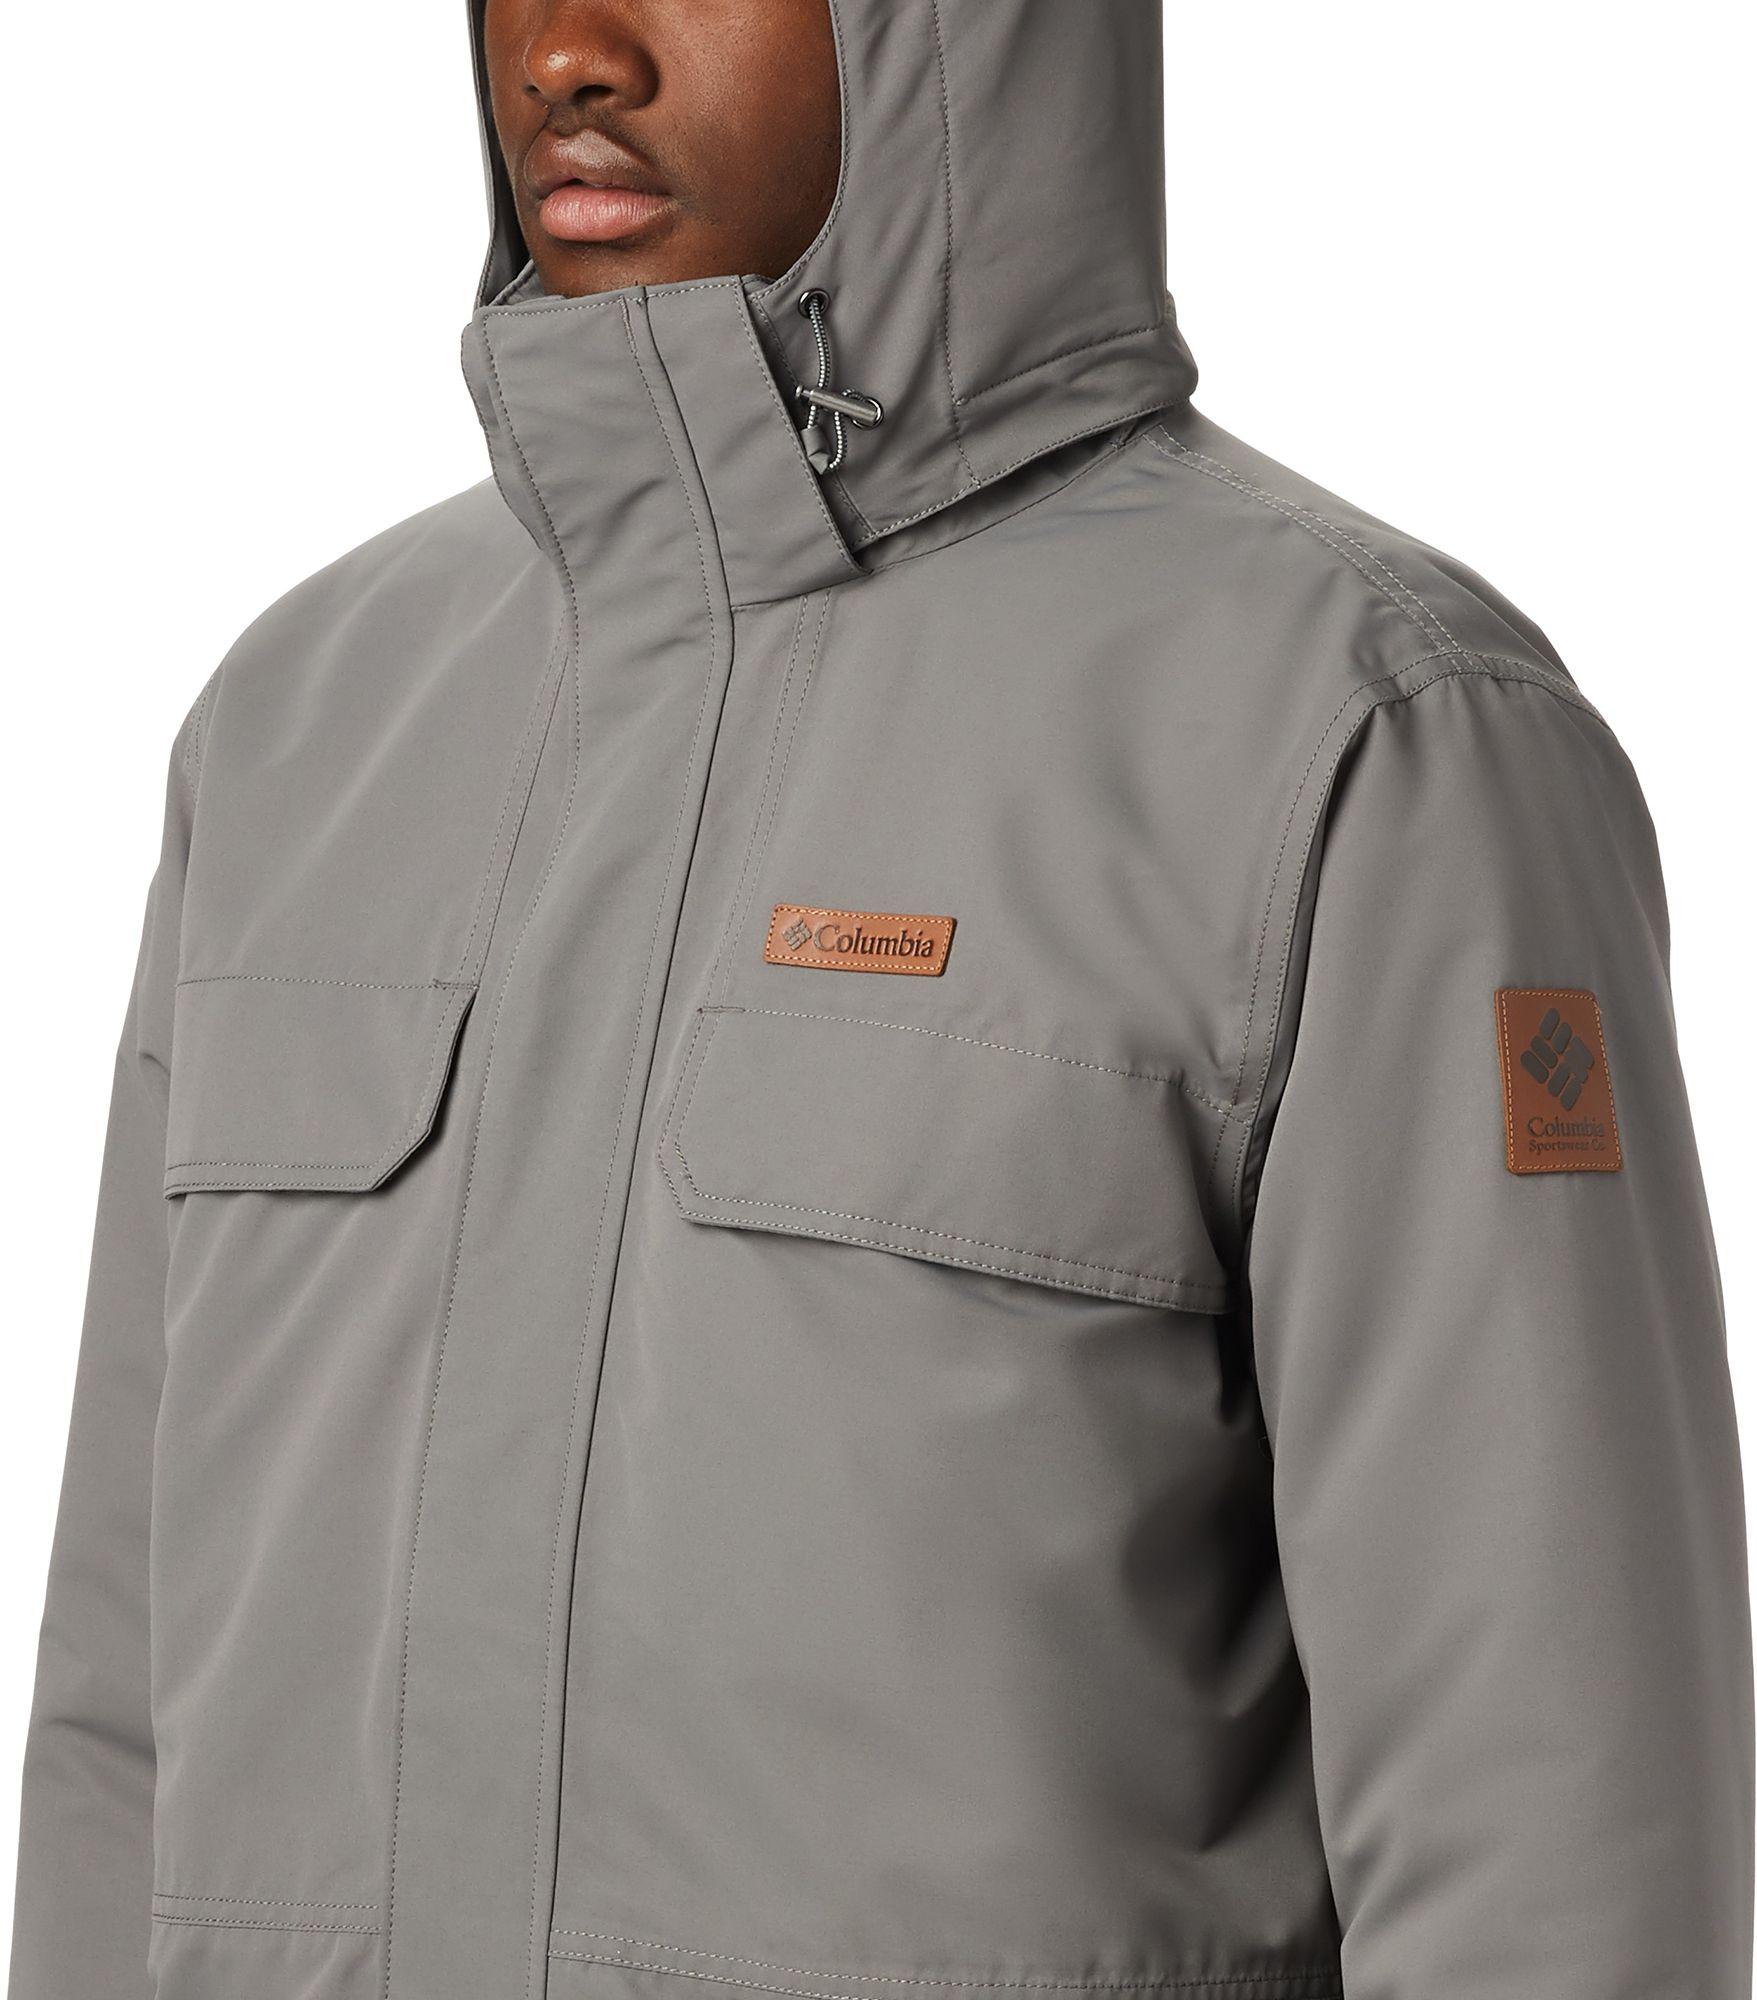 Columbia Rugged Path Parka in Gray for Men - Save 38% - Lyst